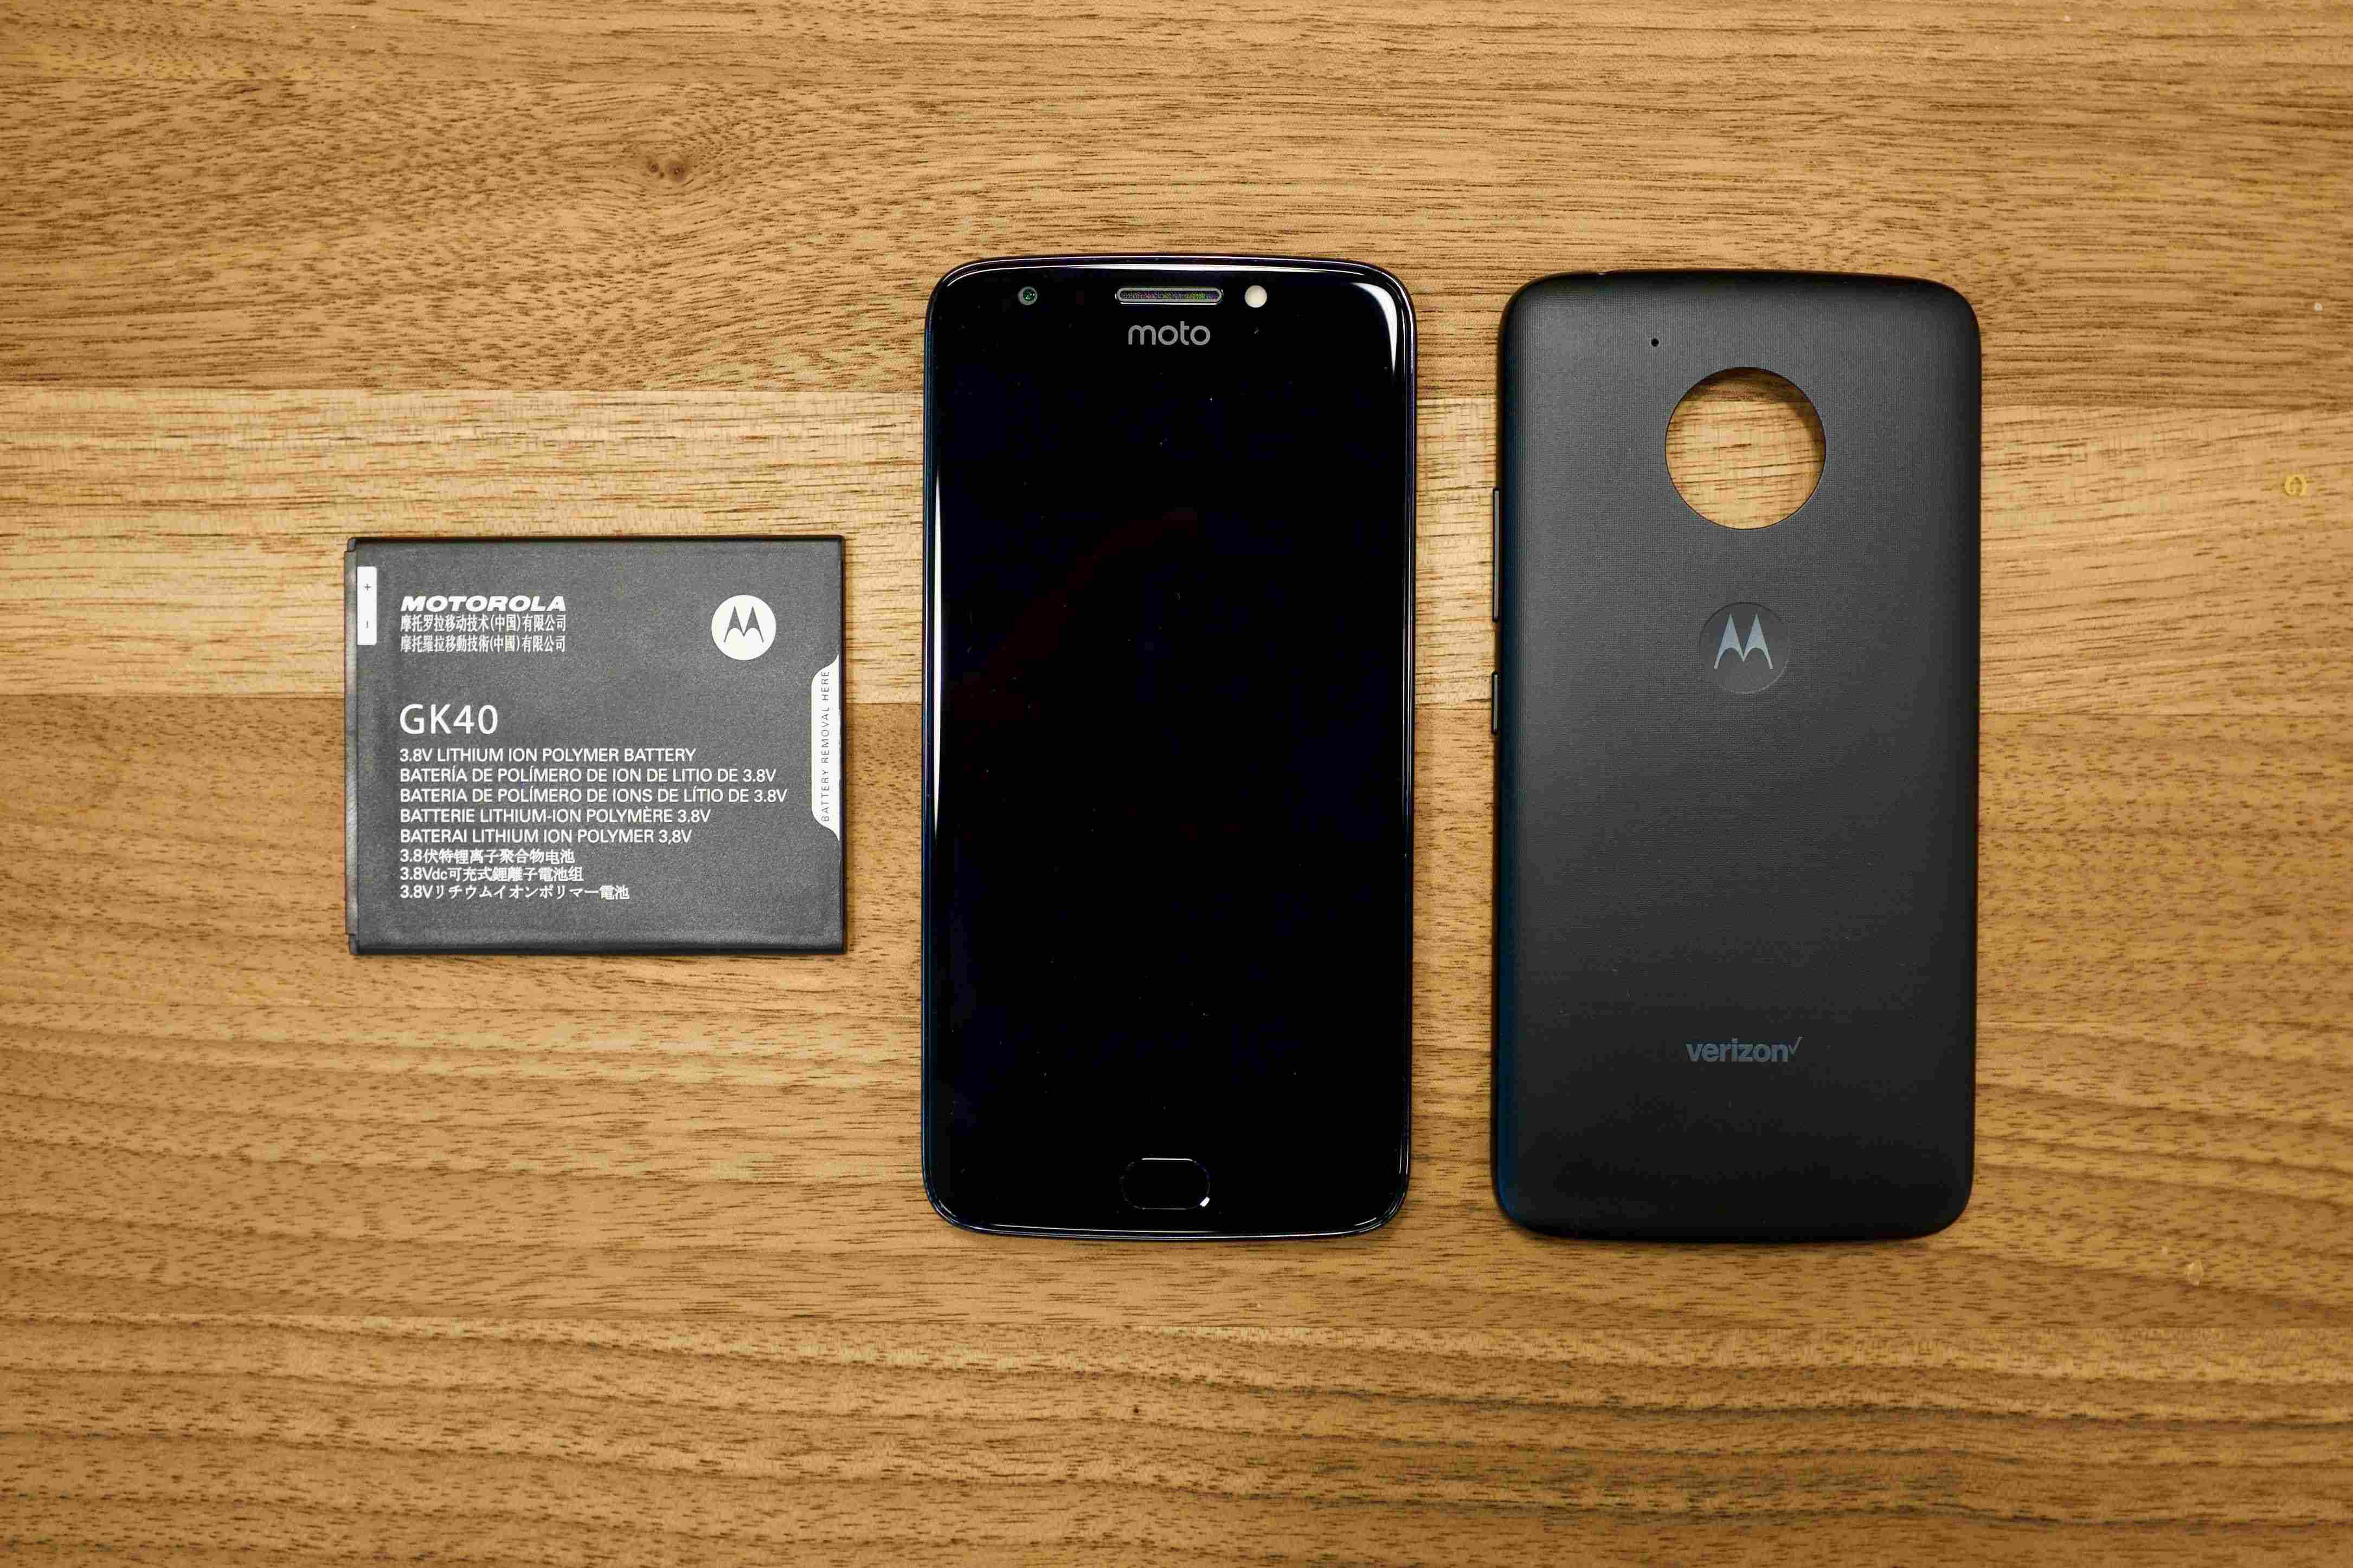 Moto E4 Plus available at Rs 999 with Flipkart exchange offer